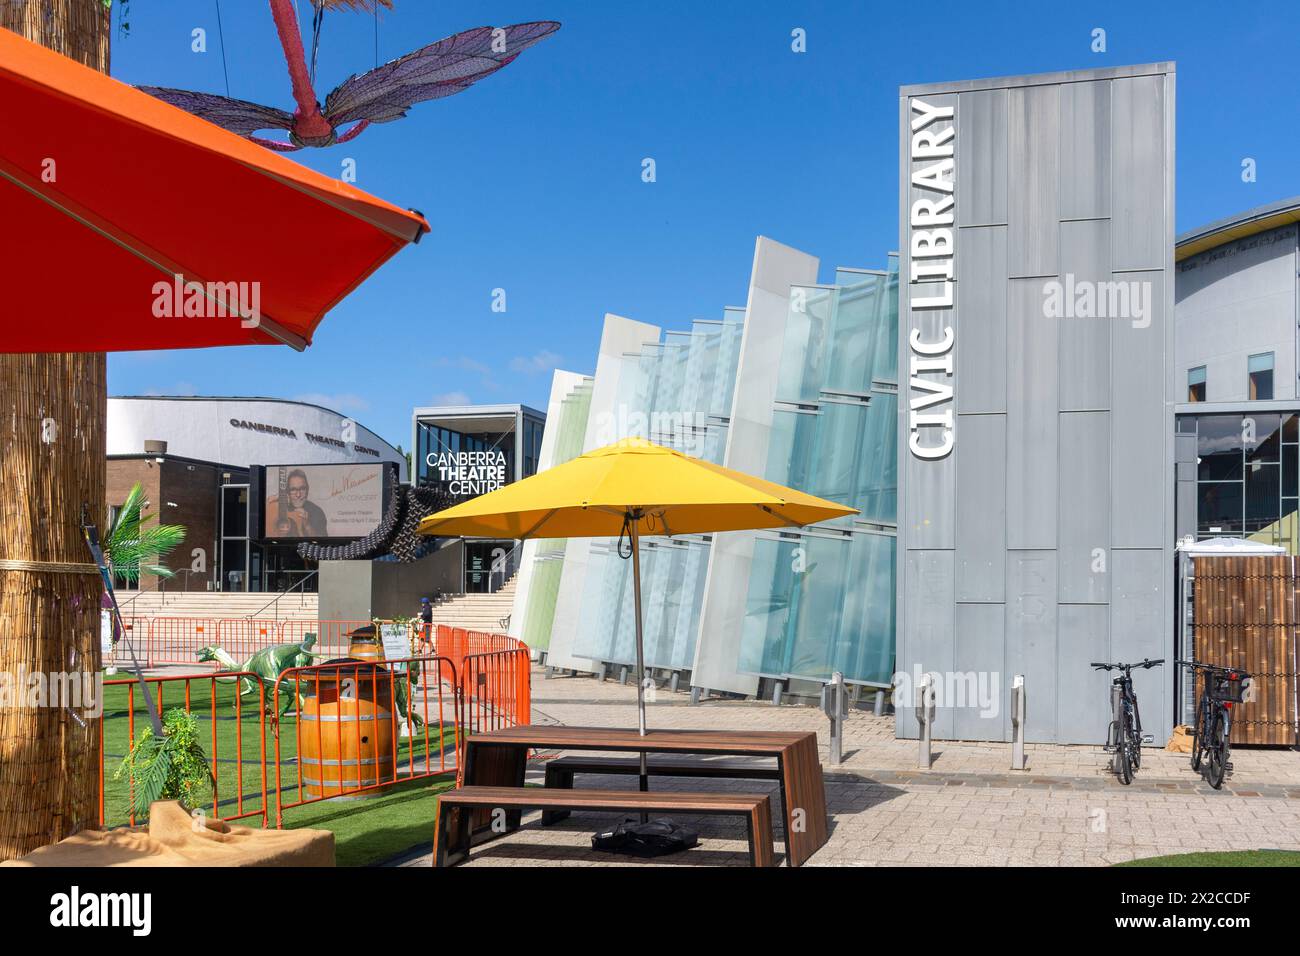 Canberra Theatre and Library, Civic Square, Central Canberra, Canberra, Australian Capital Territory, Australien Stockfoto